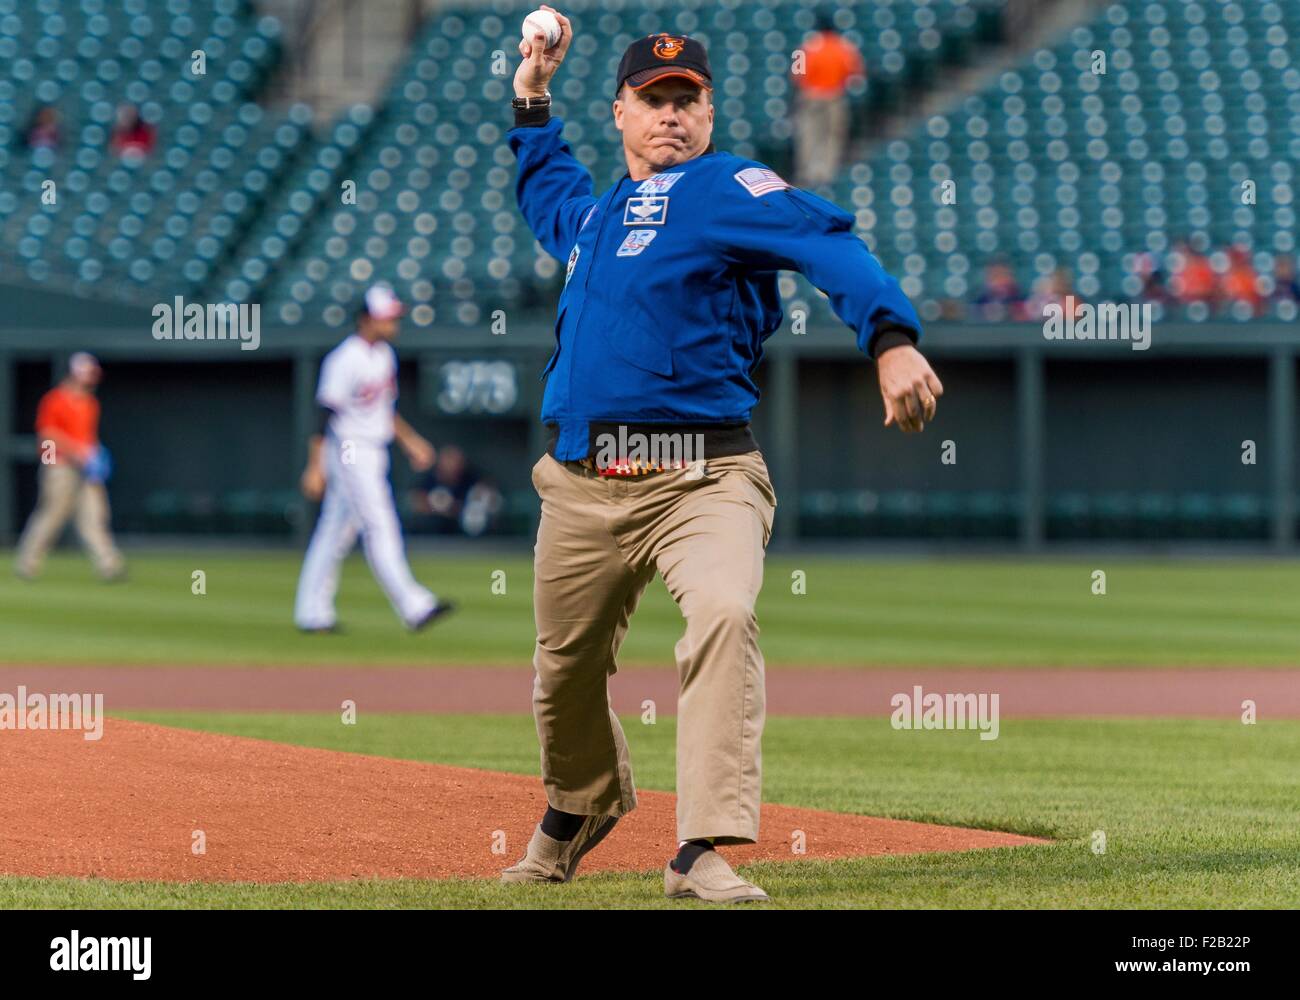 NASA astronaut and Maryland native, Terry Virts throws out the ceremonial first pitch before the Boston Red Sox take on the Baltimore Orioles at Camden Yards baseball stadium September 14, 2015 in Baltimore, Maryland. Virts spend 199 days aboard the International Space Station. Stock Photo